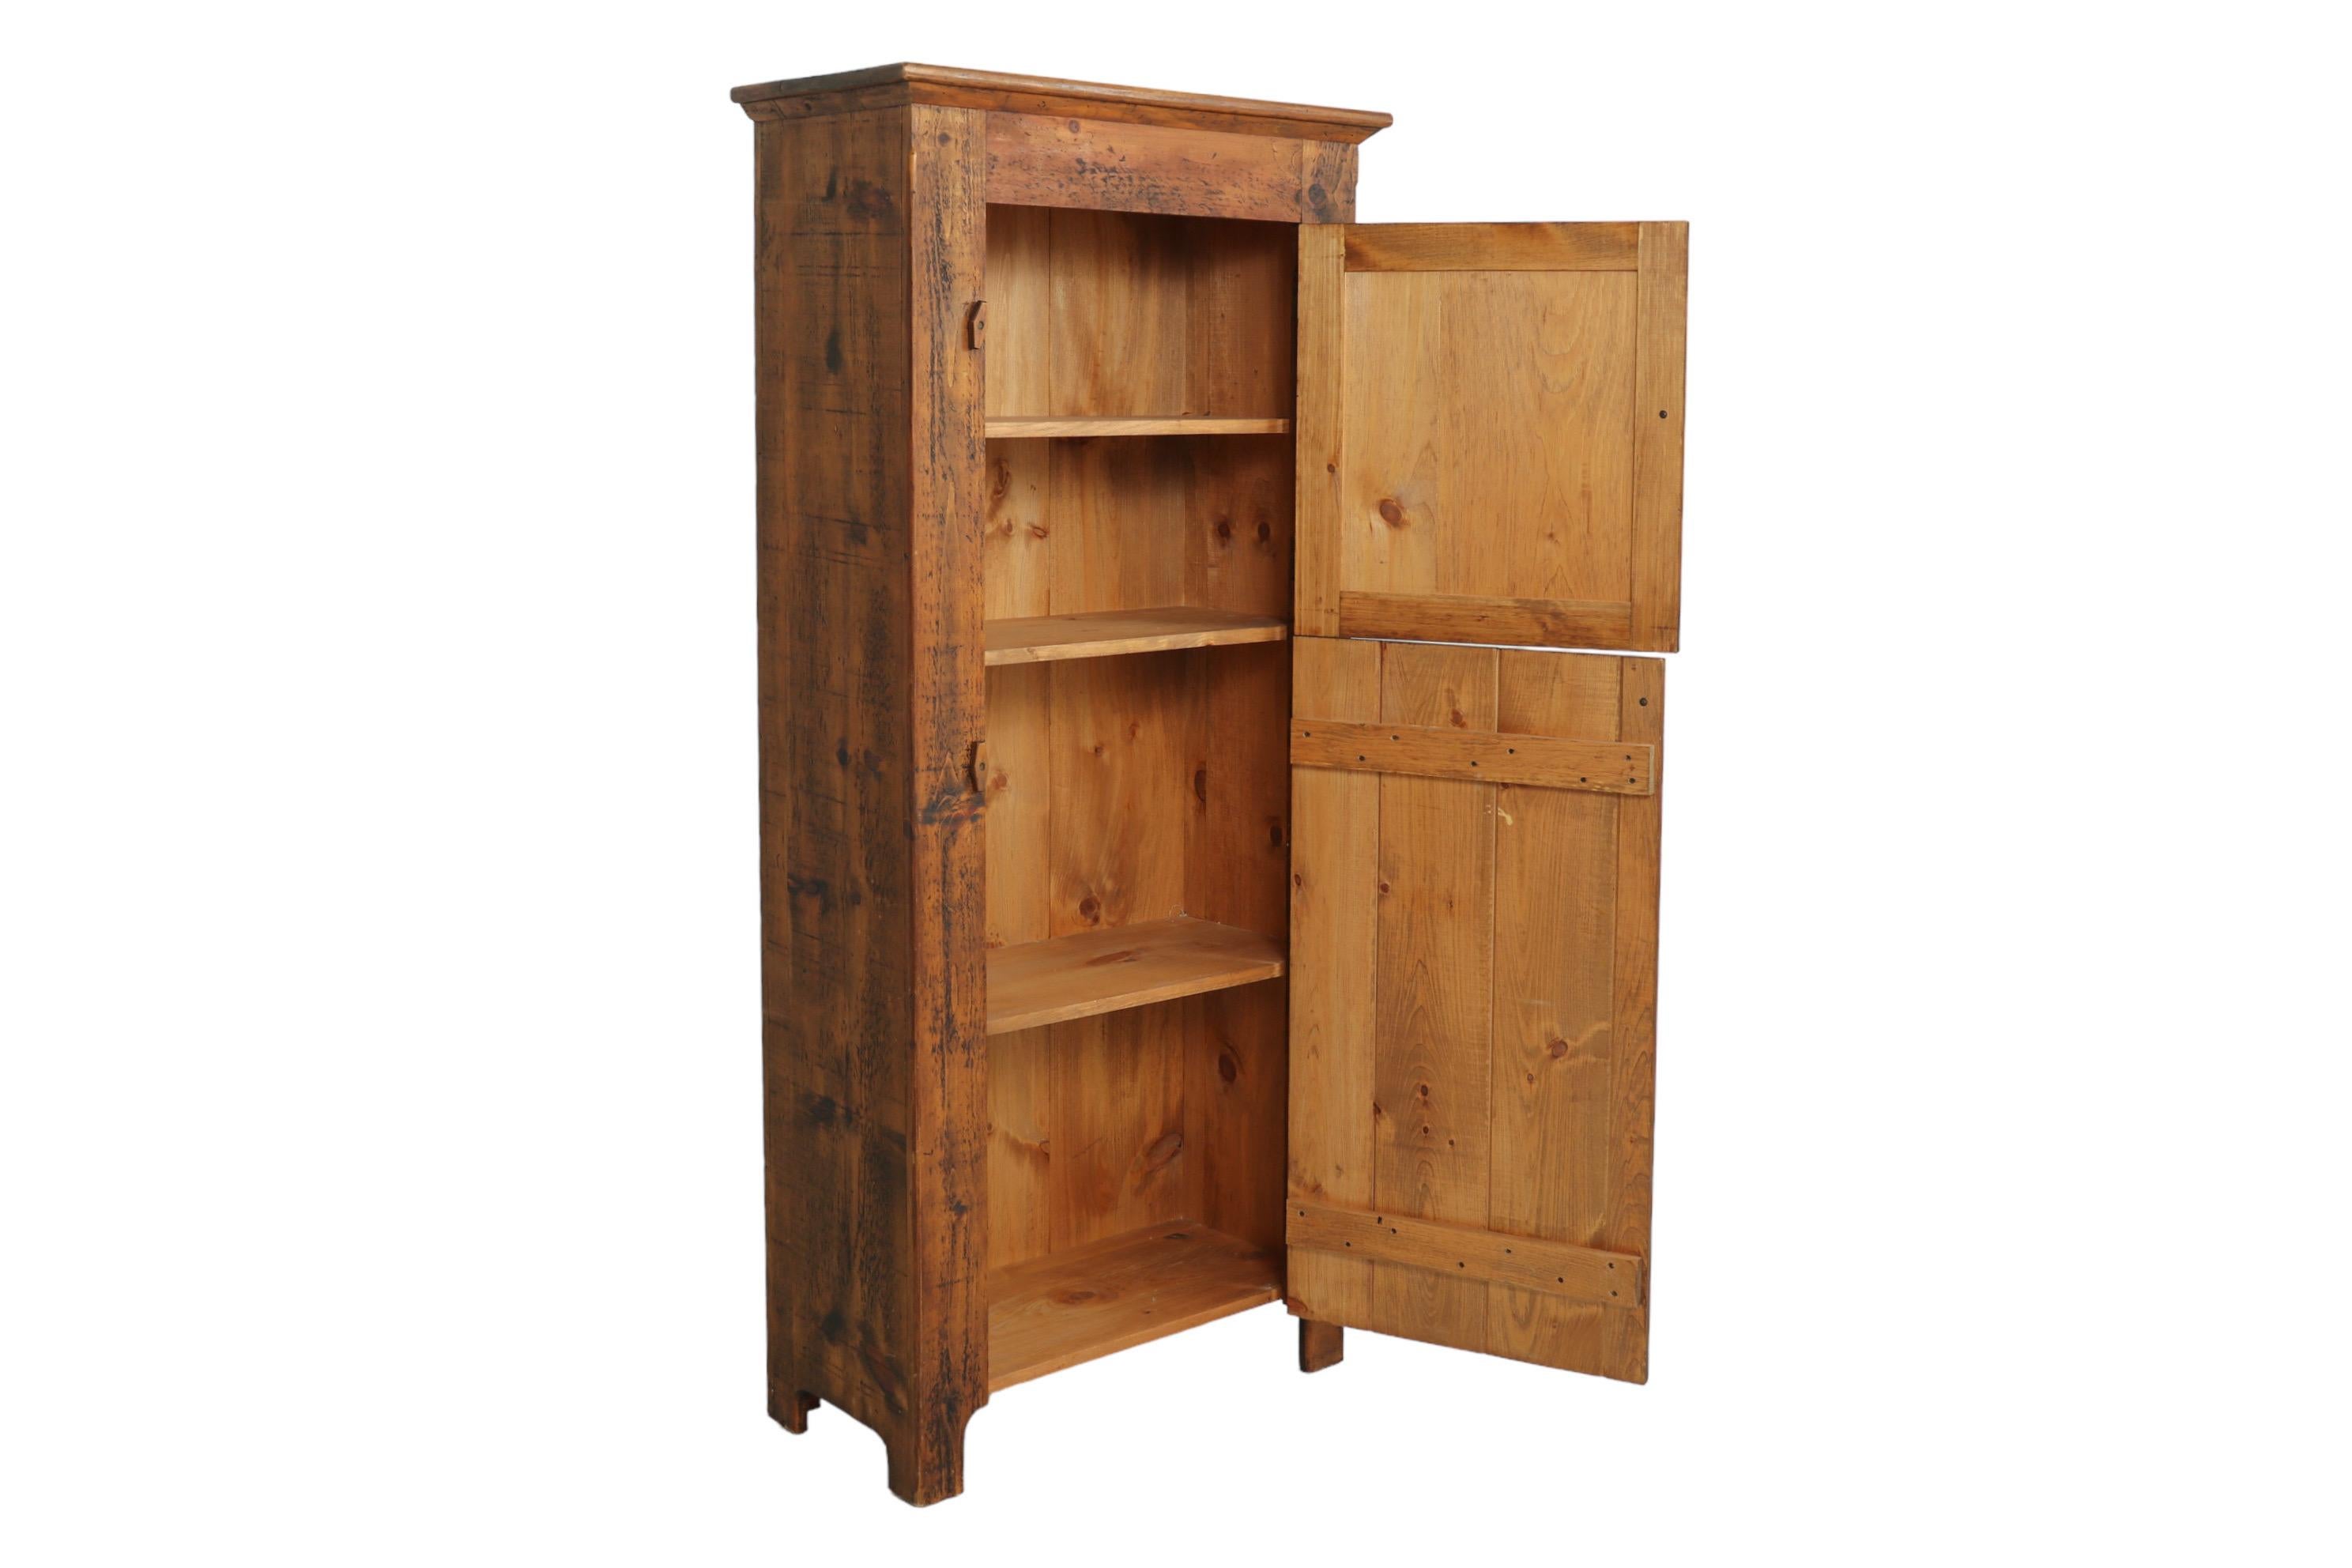 A farmhouse style hand painted cabinet made of knotty pine. Cabinet doors give the look of a Dutch door, with a cow's face painted on the upper cabinet door, and the lower door constructed of planks of wood. Doors open with mushroom knob handles and